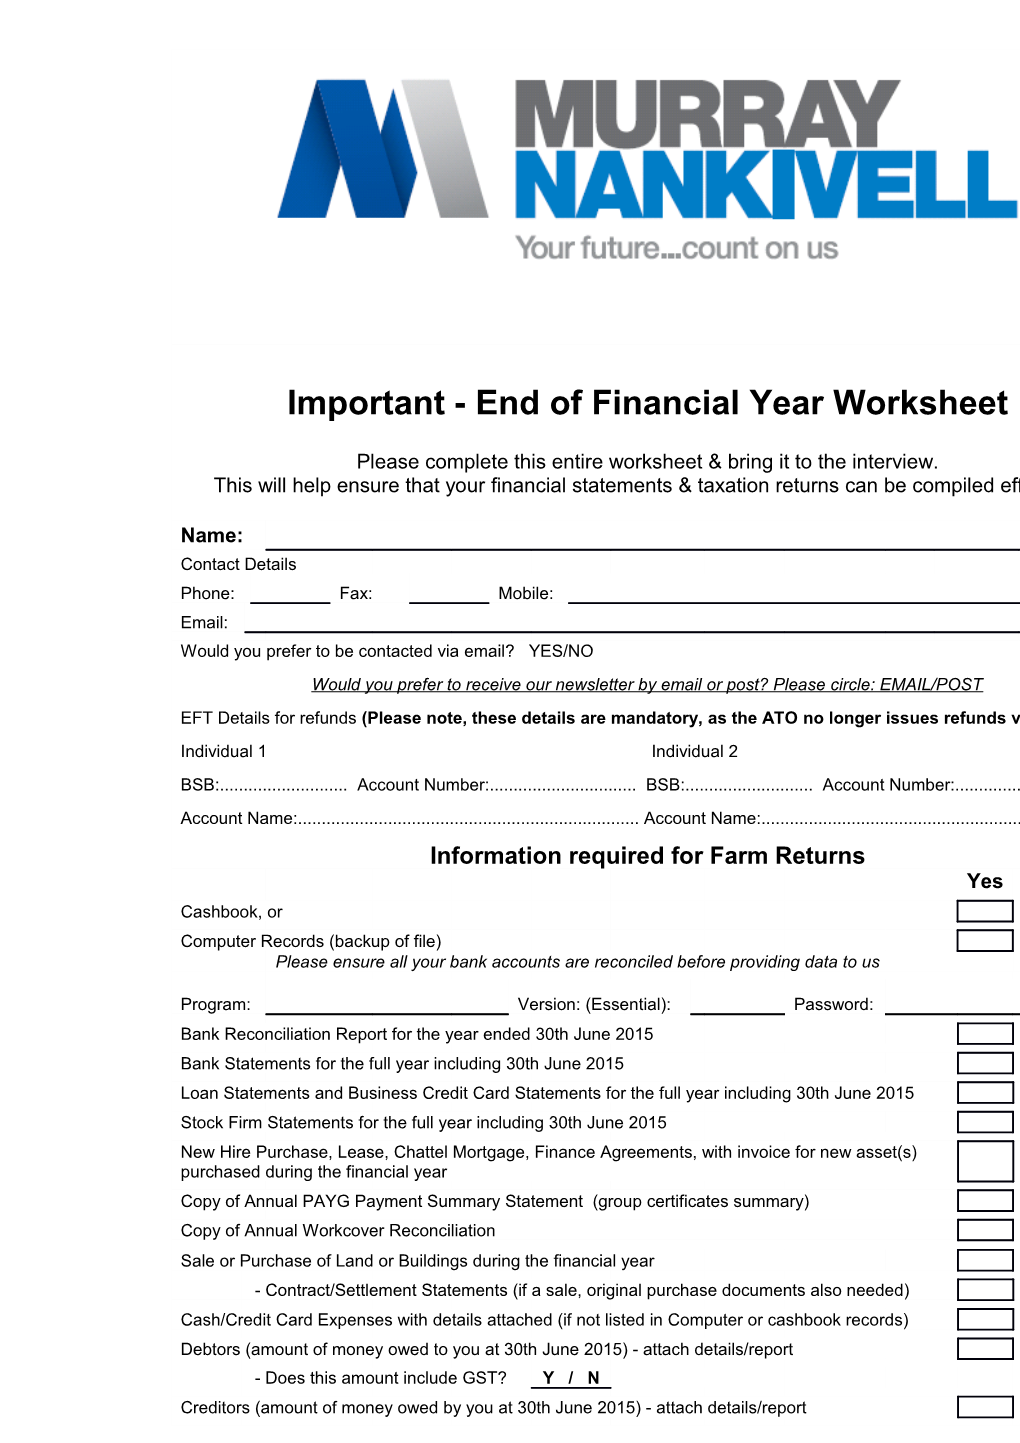 Important - End of Financial Year Worksheet